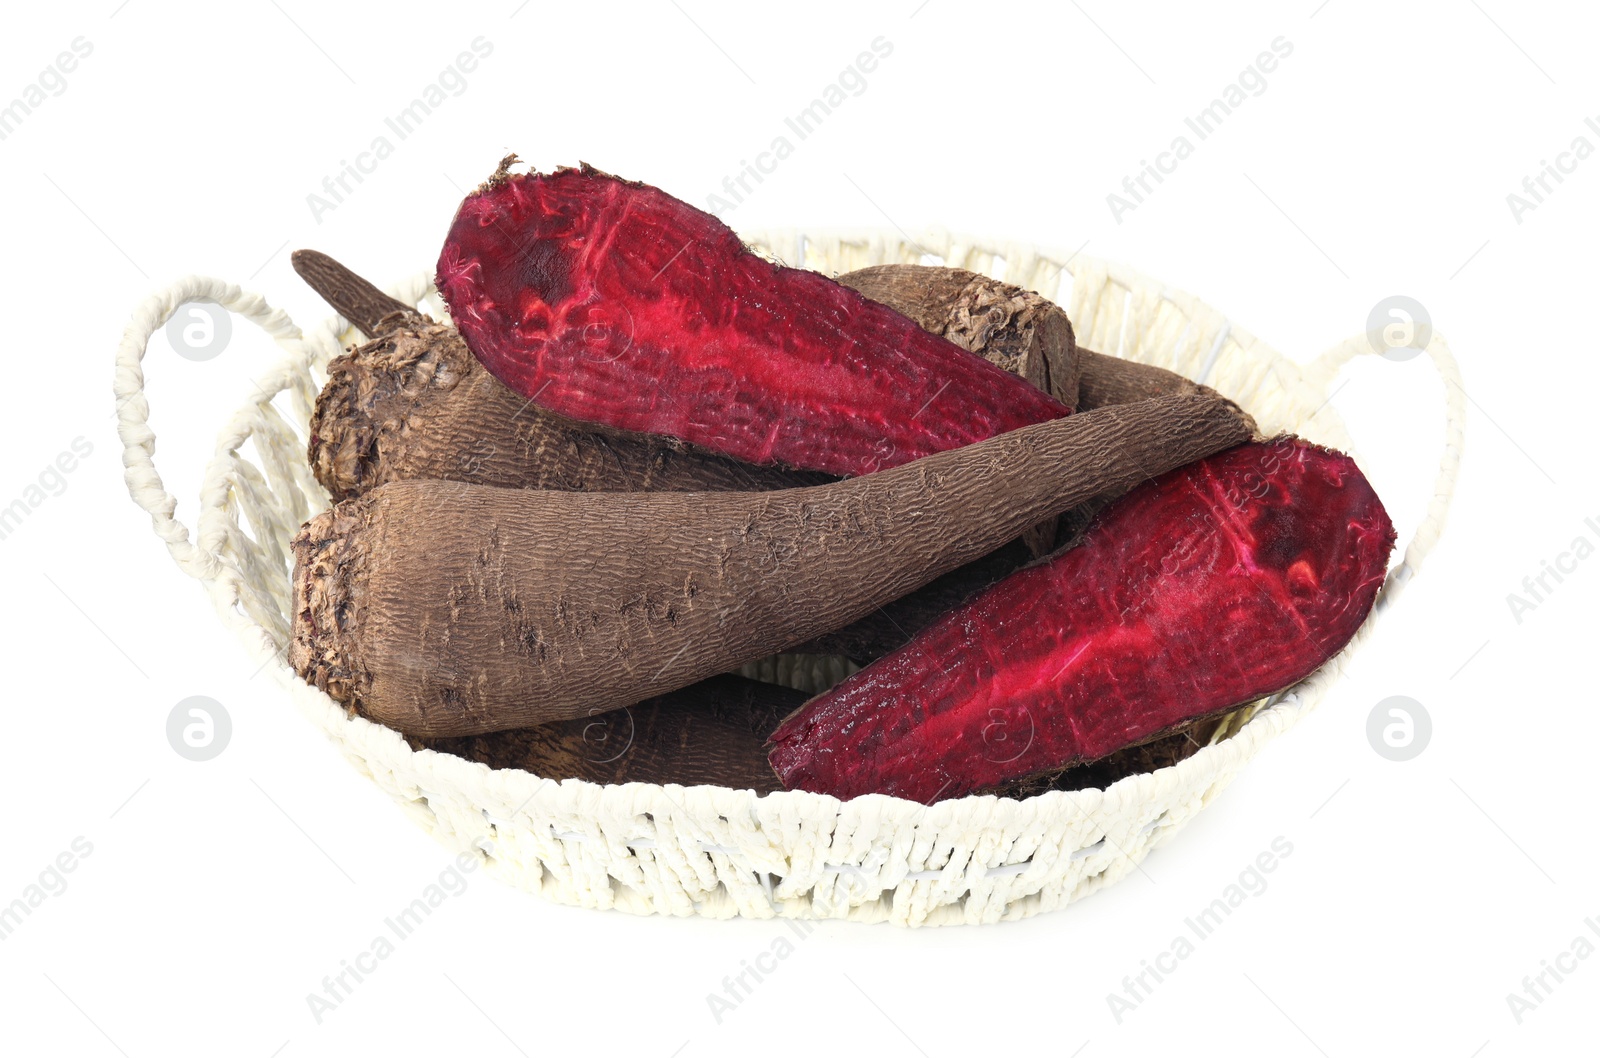 Photo of Whole and cut red beets in basket isolated on white